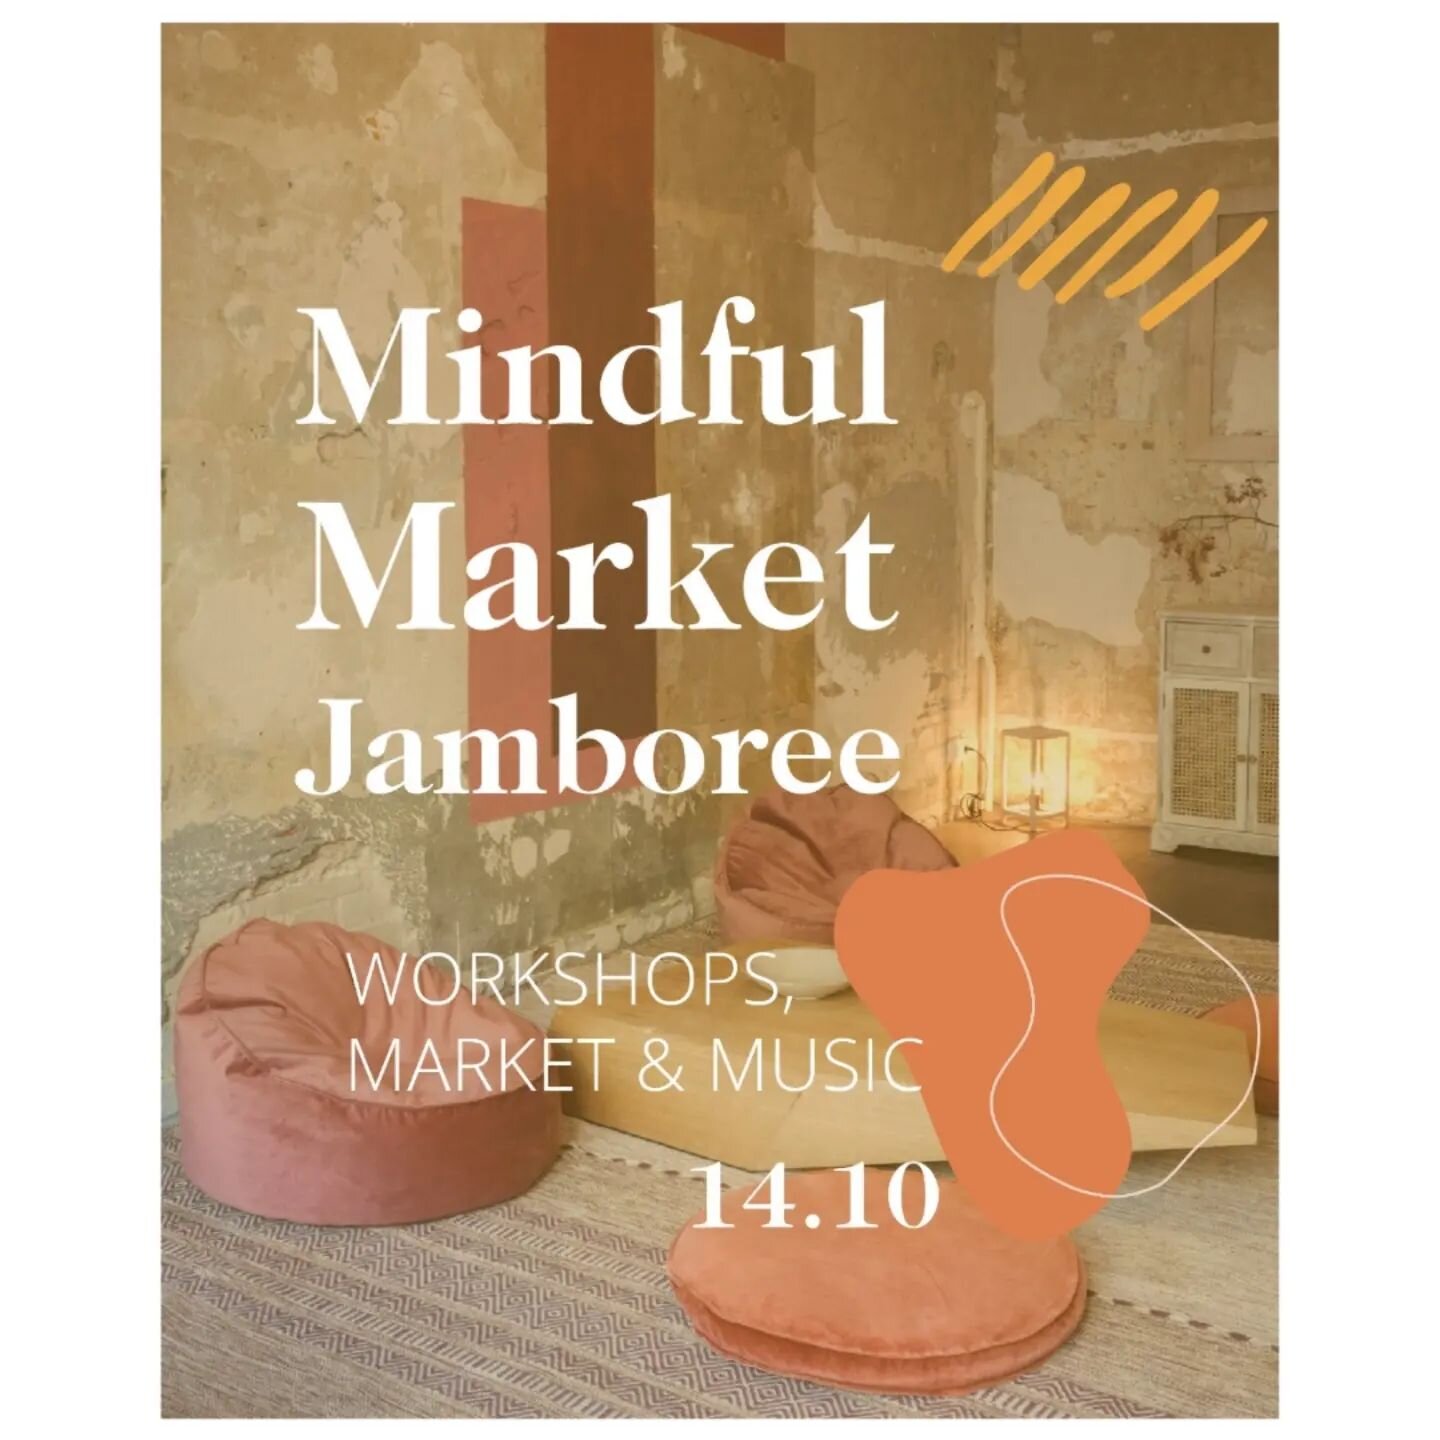 Zeitgeist Zentrum is very happy to host our next charity event &ldquo;Mindful Market Jamboree&quot;, an event organized by and aimed at raising funds for Project Tr&ecirc;s (@projecttres) a non-profit organization dedicated to establishing economic s